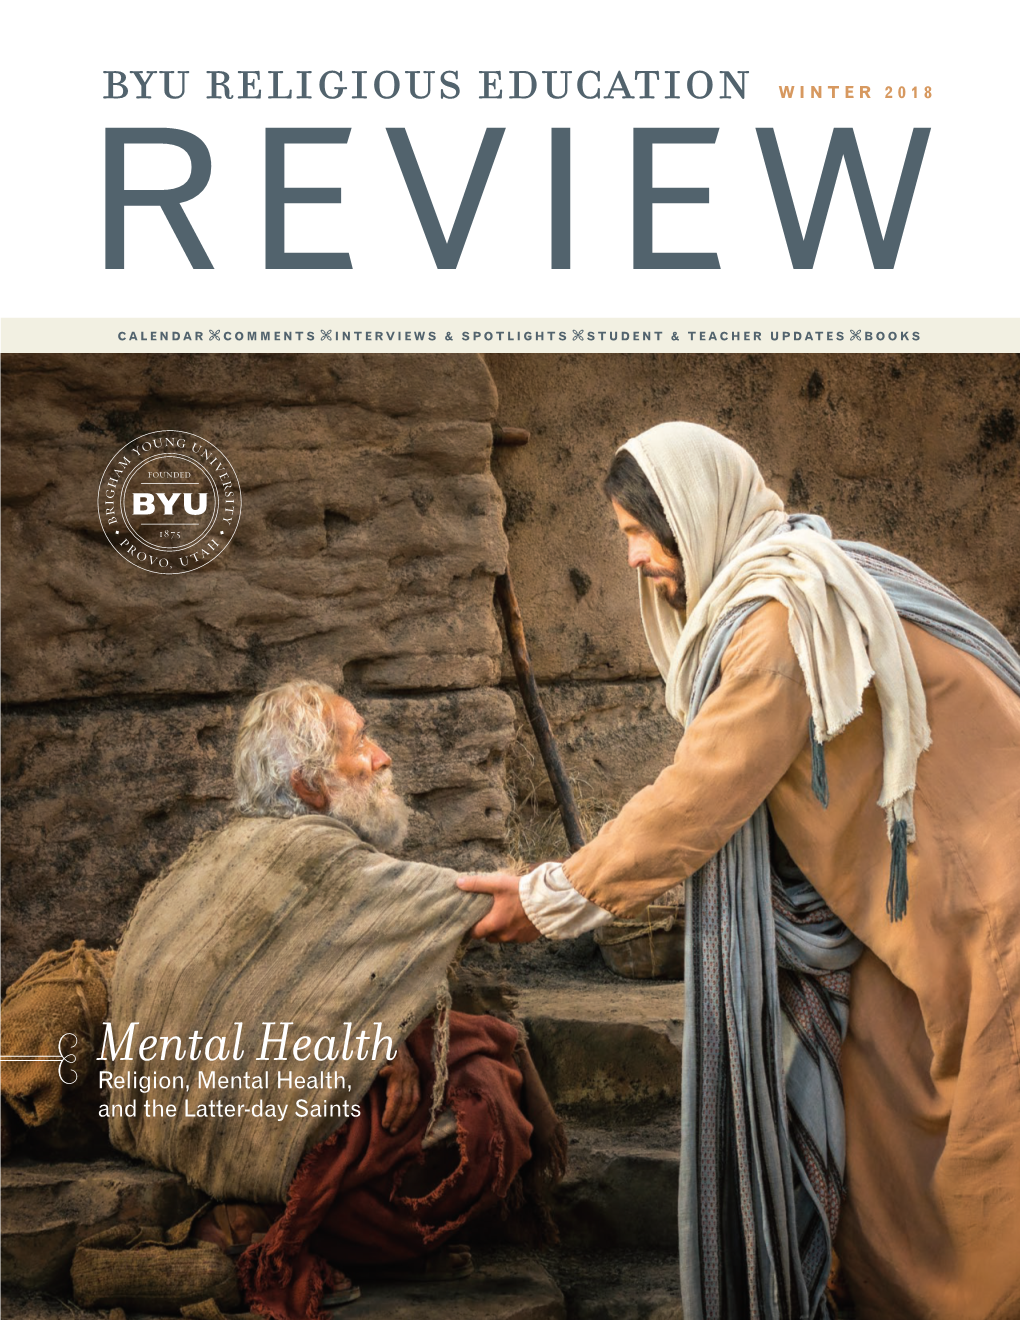 Byu Religious Education WINTER 2018 REVIEW